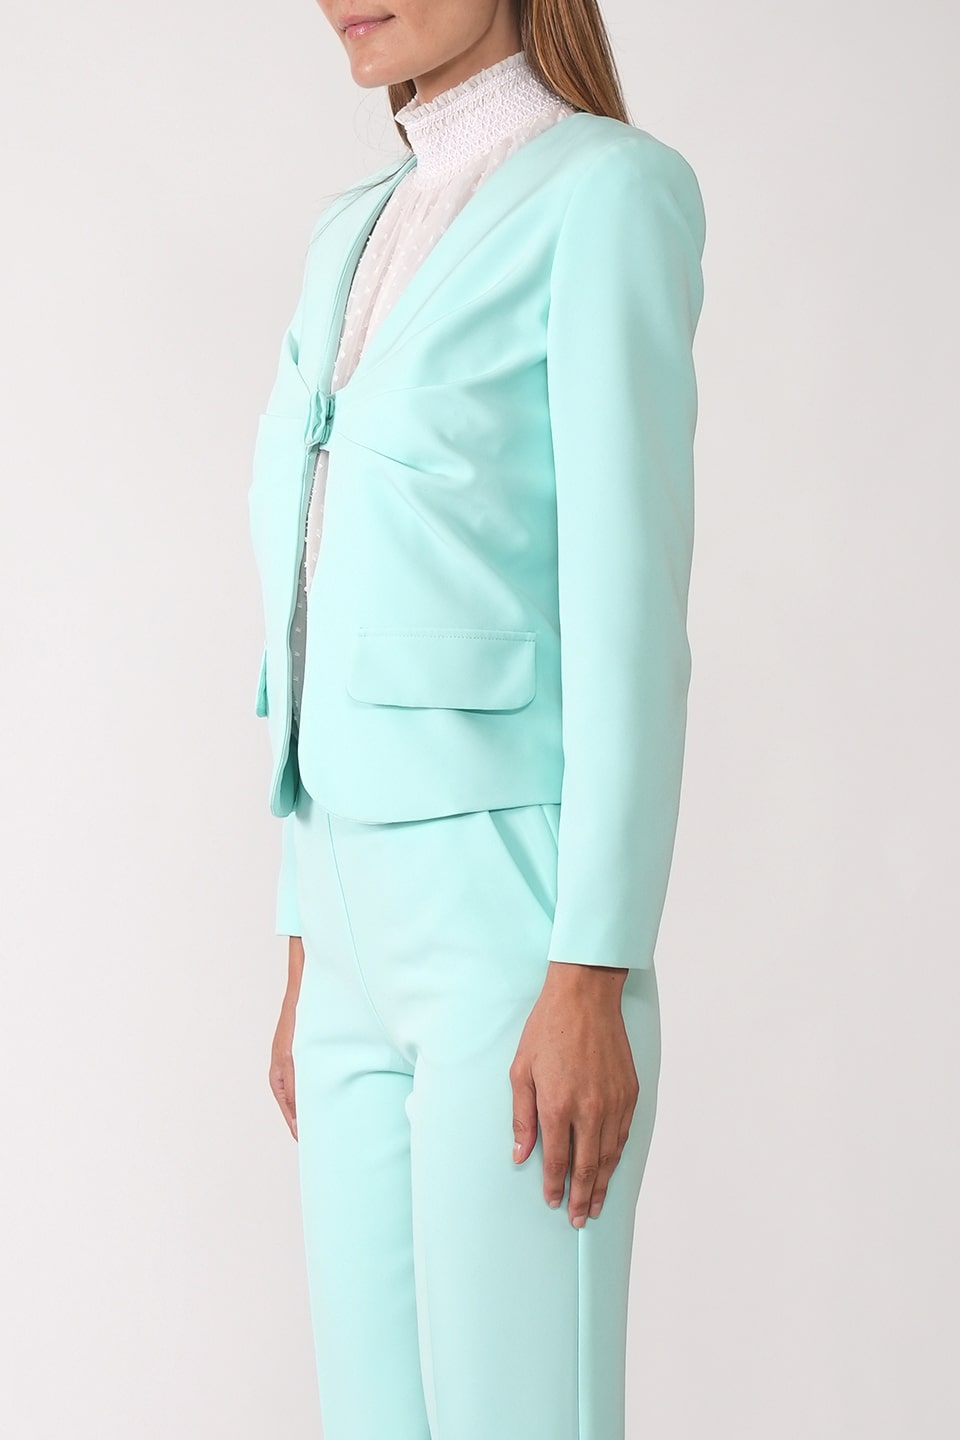 Designer Blue Women blazers, shop online with free delivery in UAE. Product gallery 2